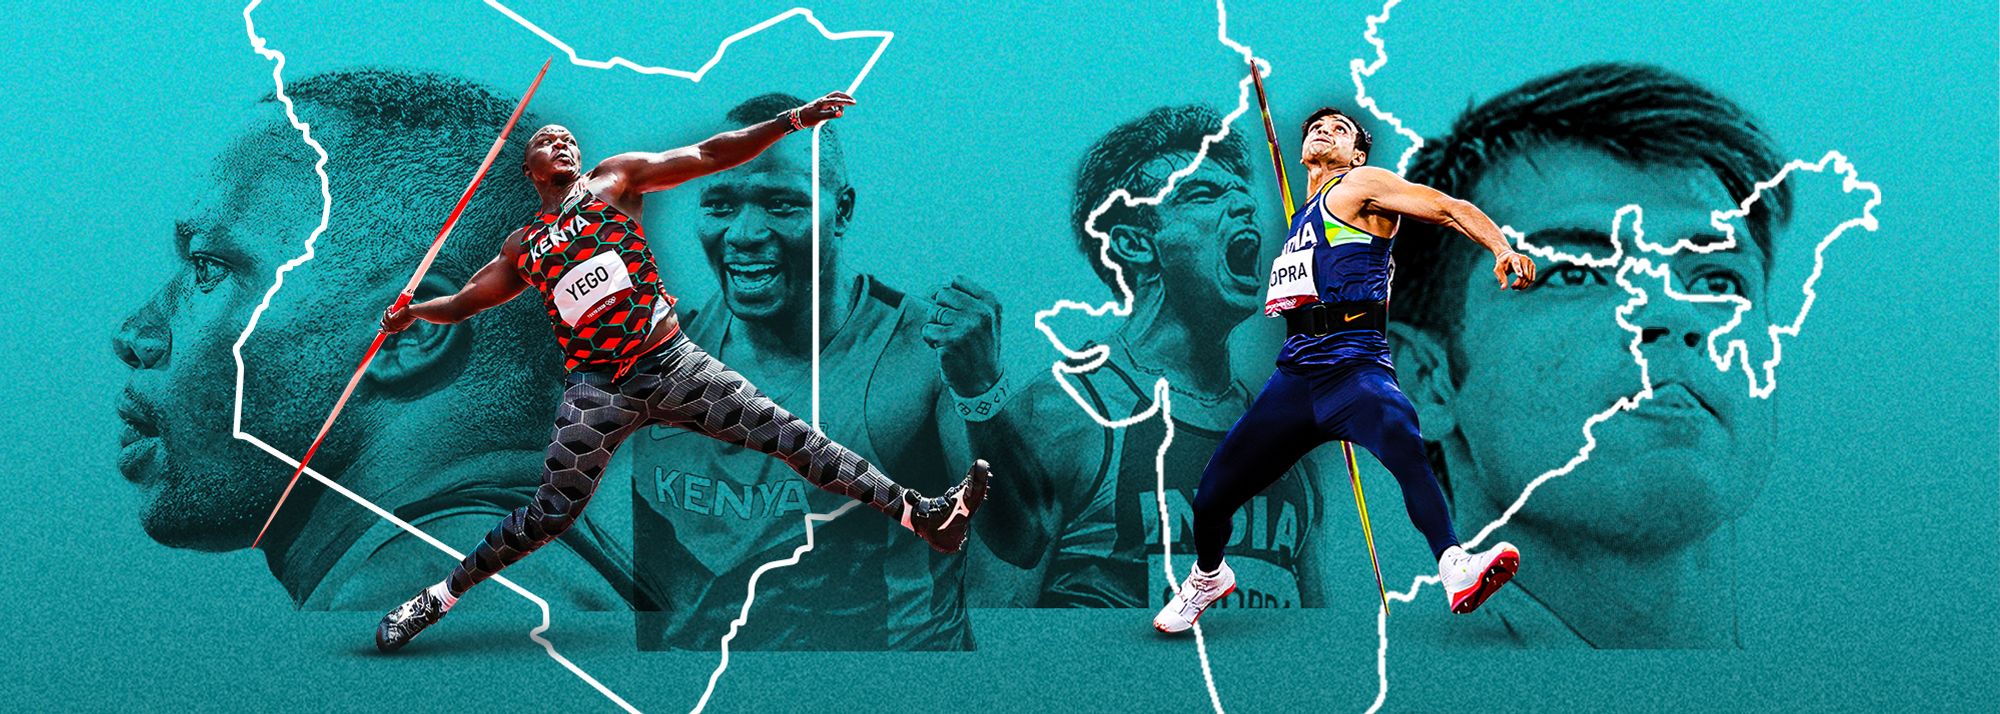 The latest edition of the World Athletics Podcast brings together three legends of the javelin, with Neeraj Chopra and Julius Yego joined by host Steve Backley.